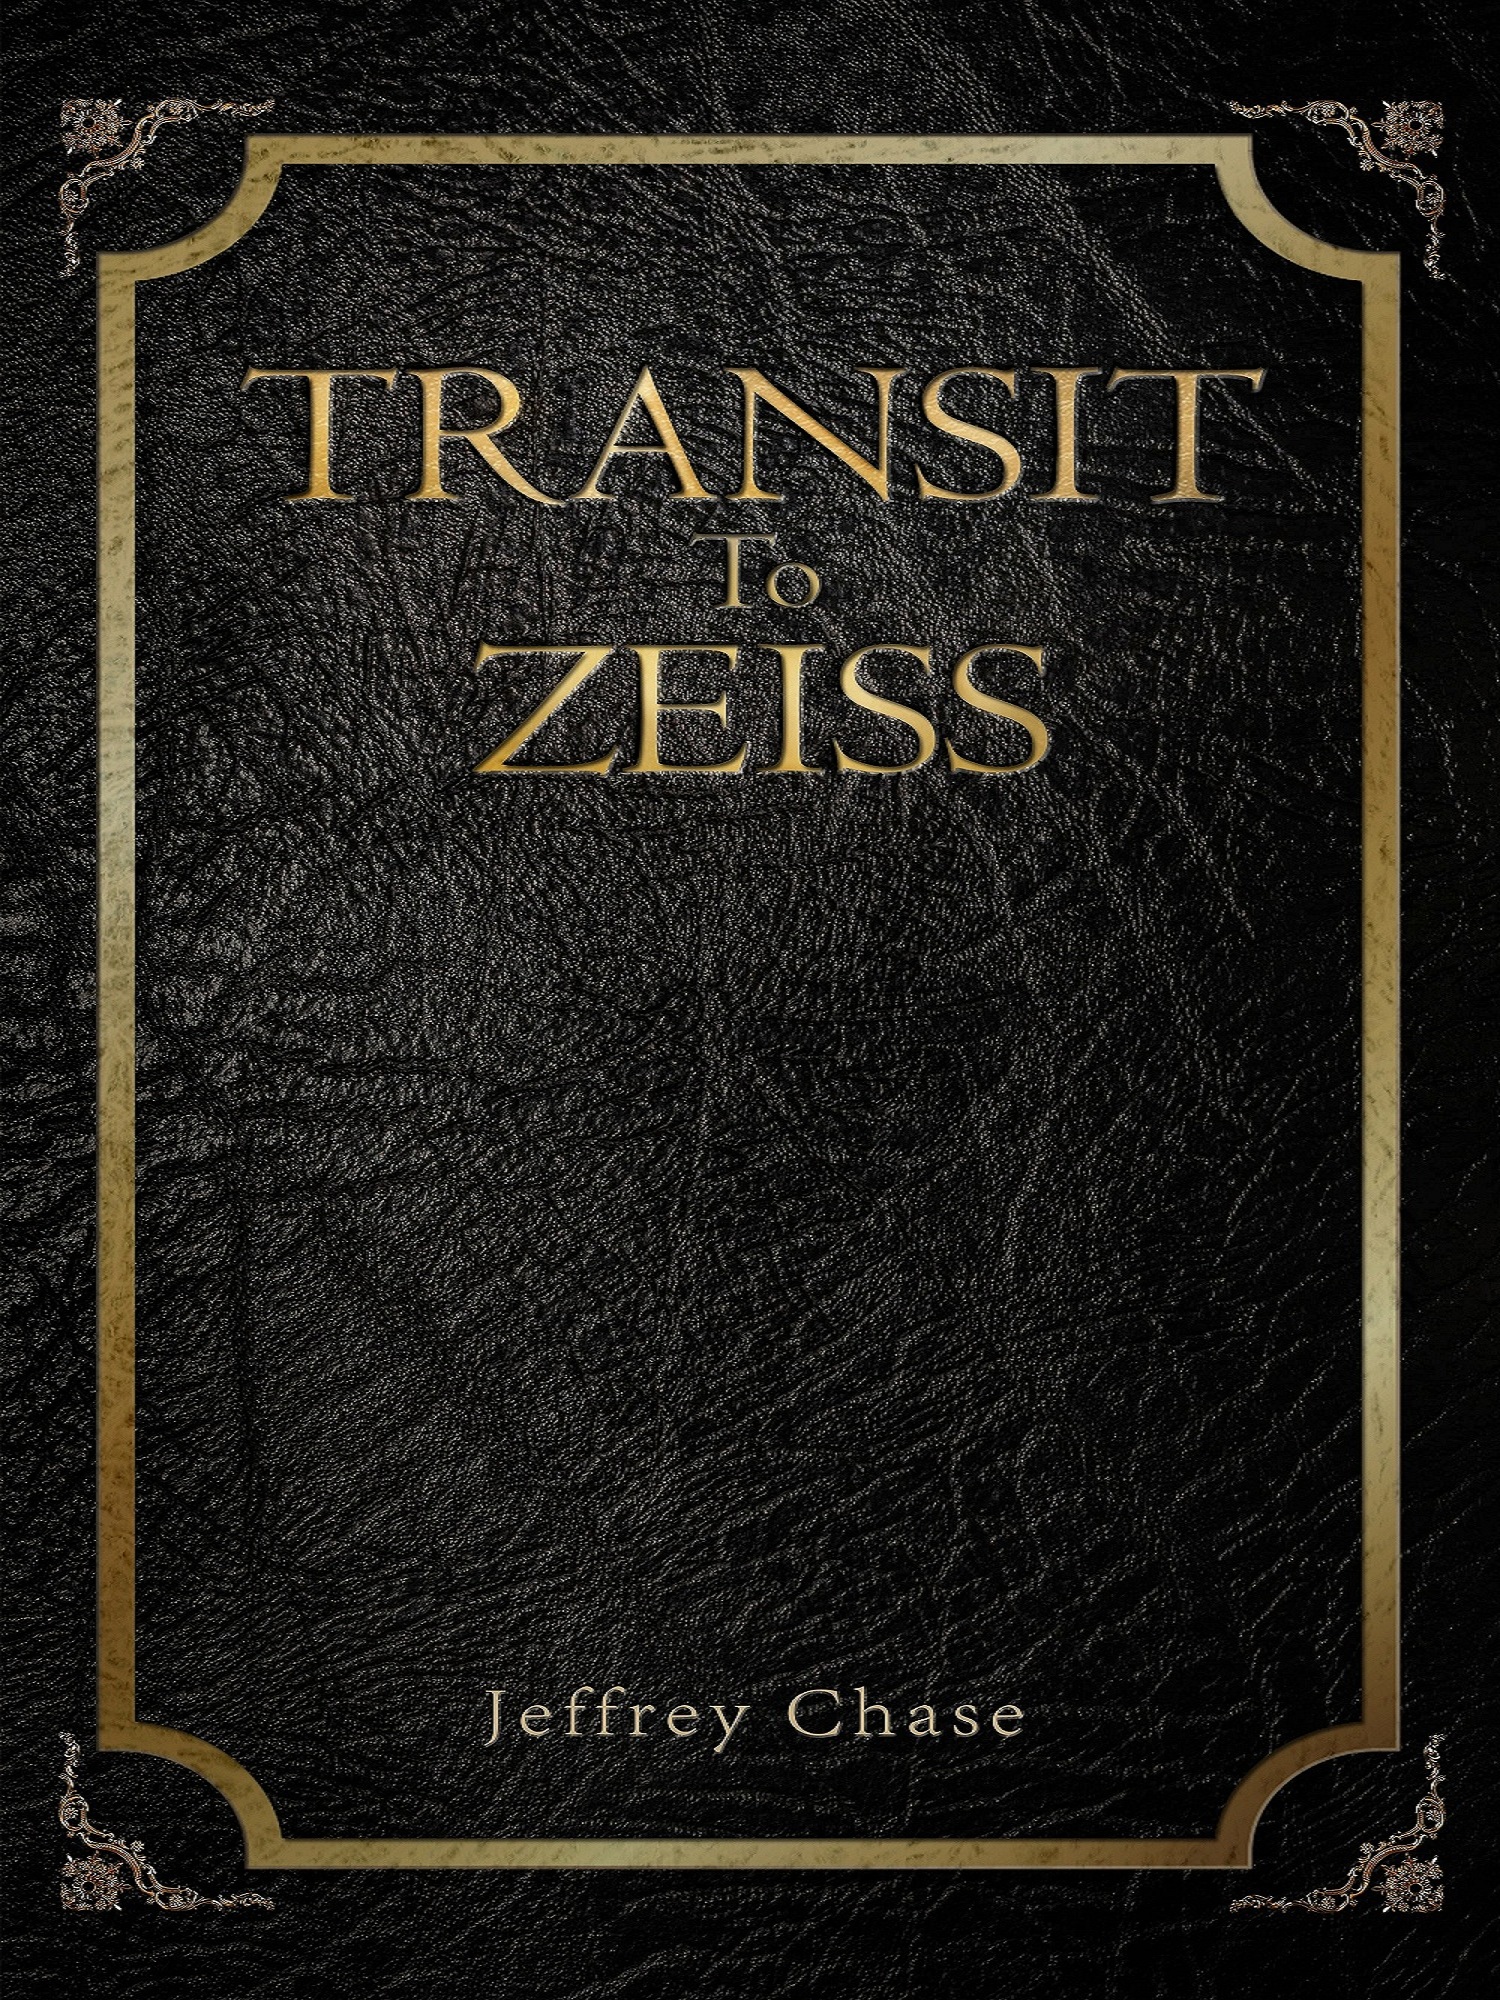 Transit to Zeiss